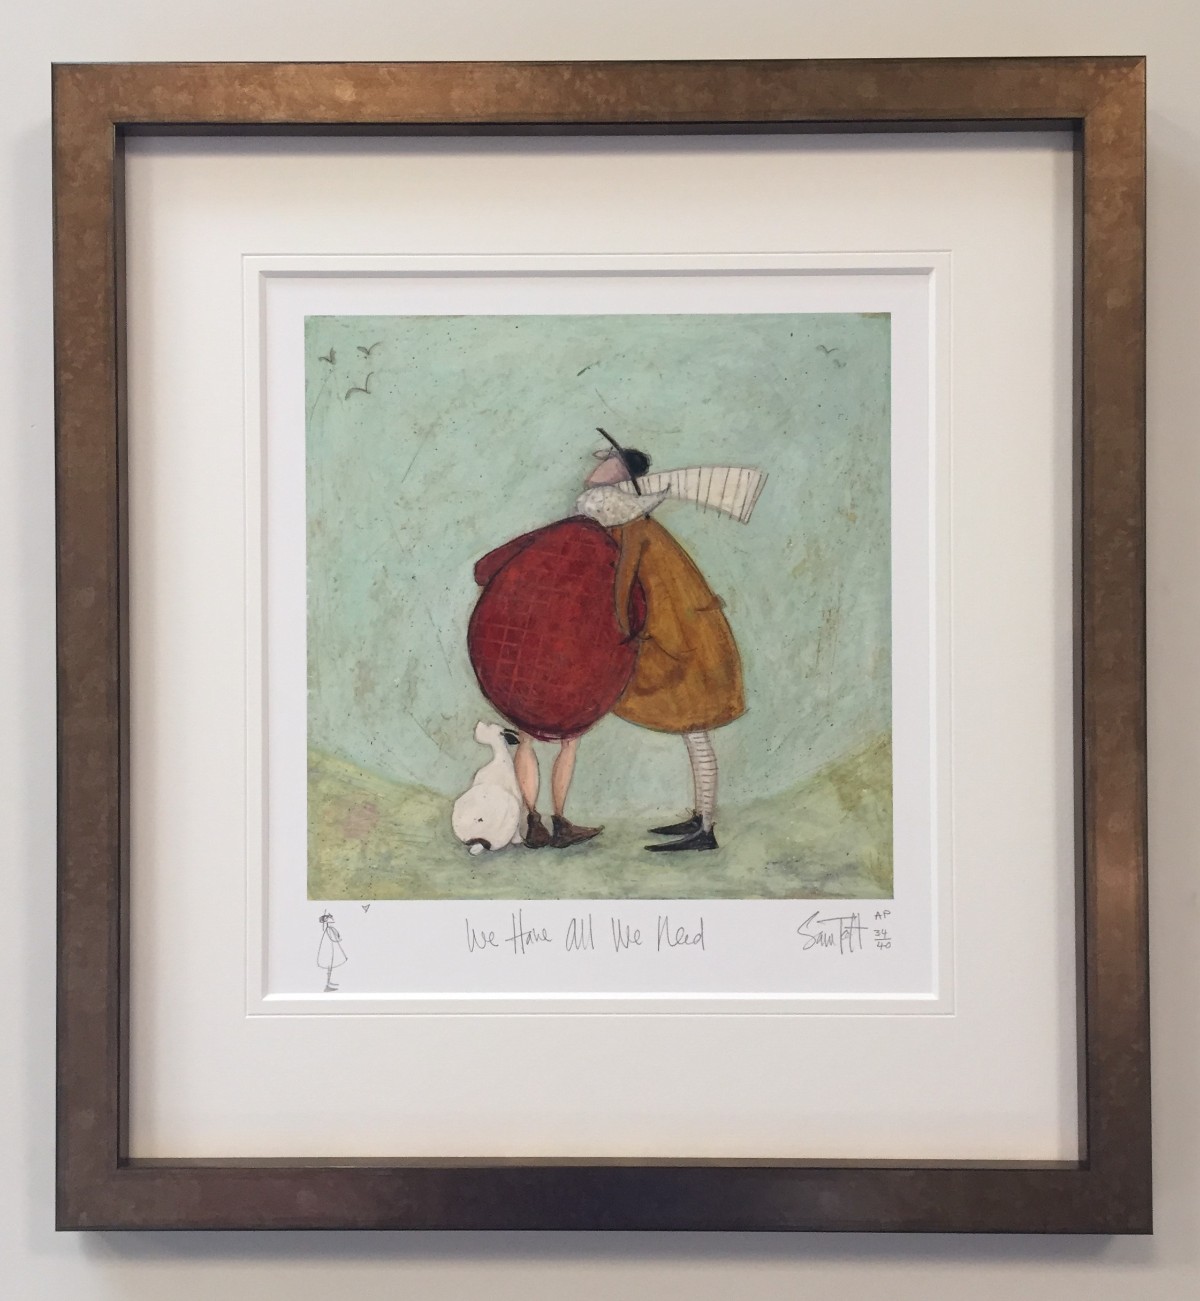 We Have All We Need -  AP Remarque by Sam Toft